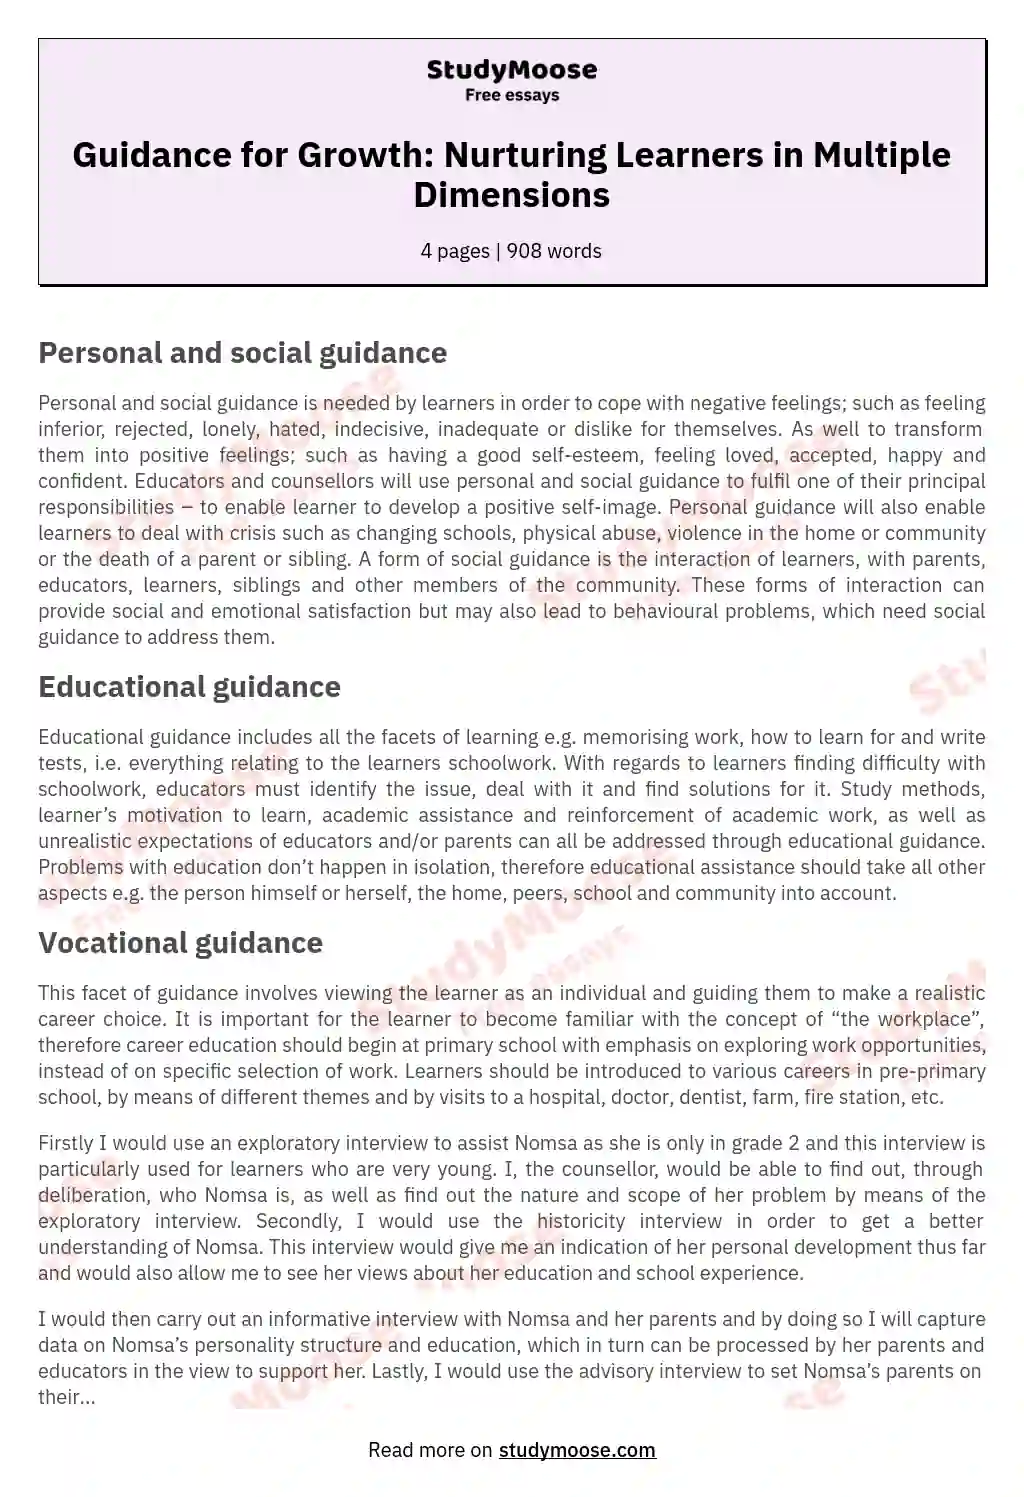 Guidance for Growth: Nurturing Learners in Multiple Dimensions essay